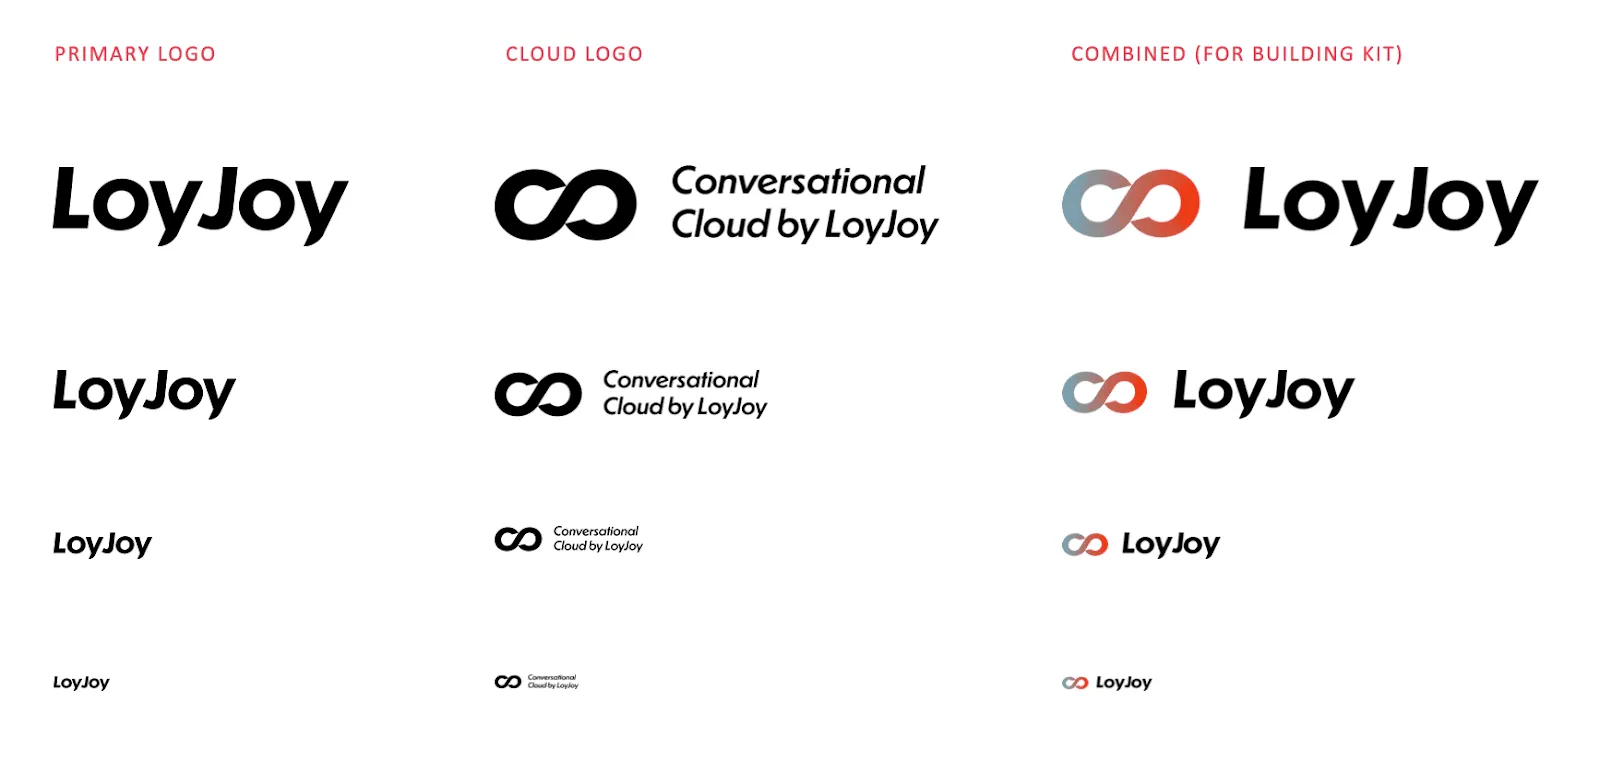 Overview of all logo assets, primary, cloud platform and combined for social media and publications.